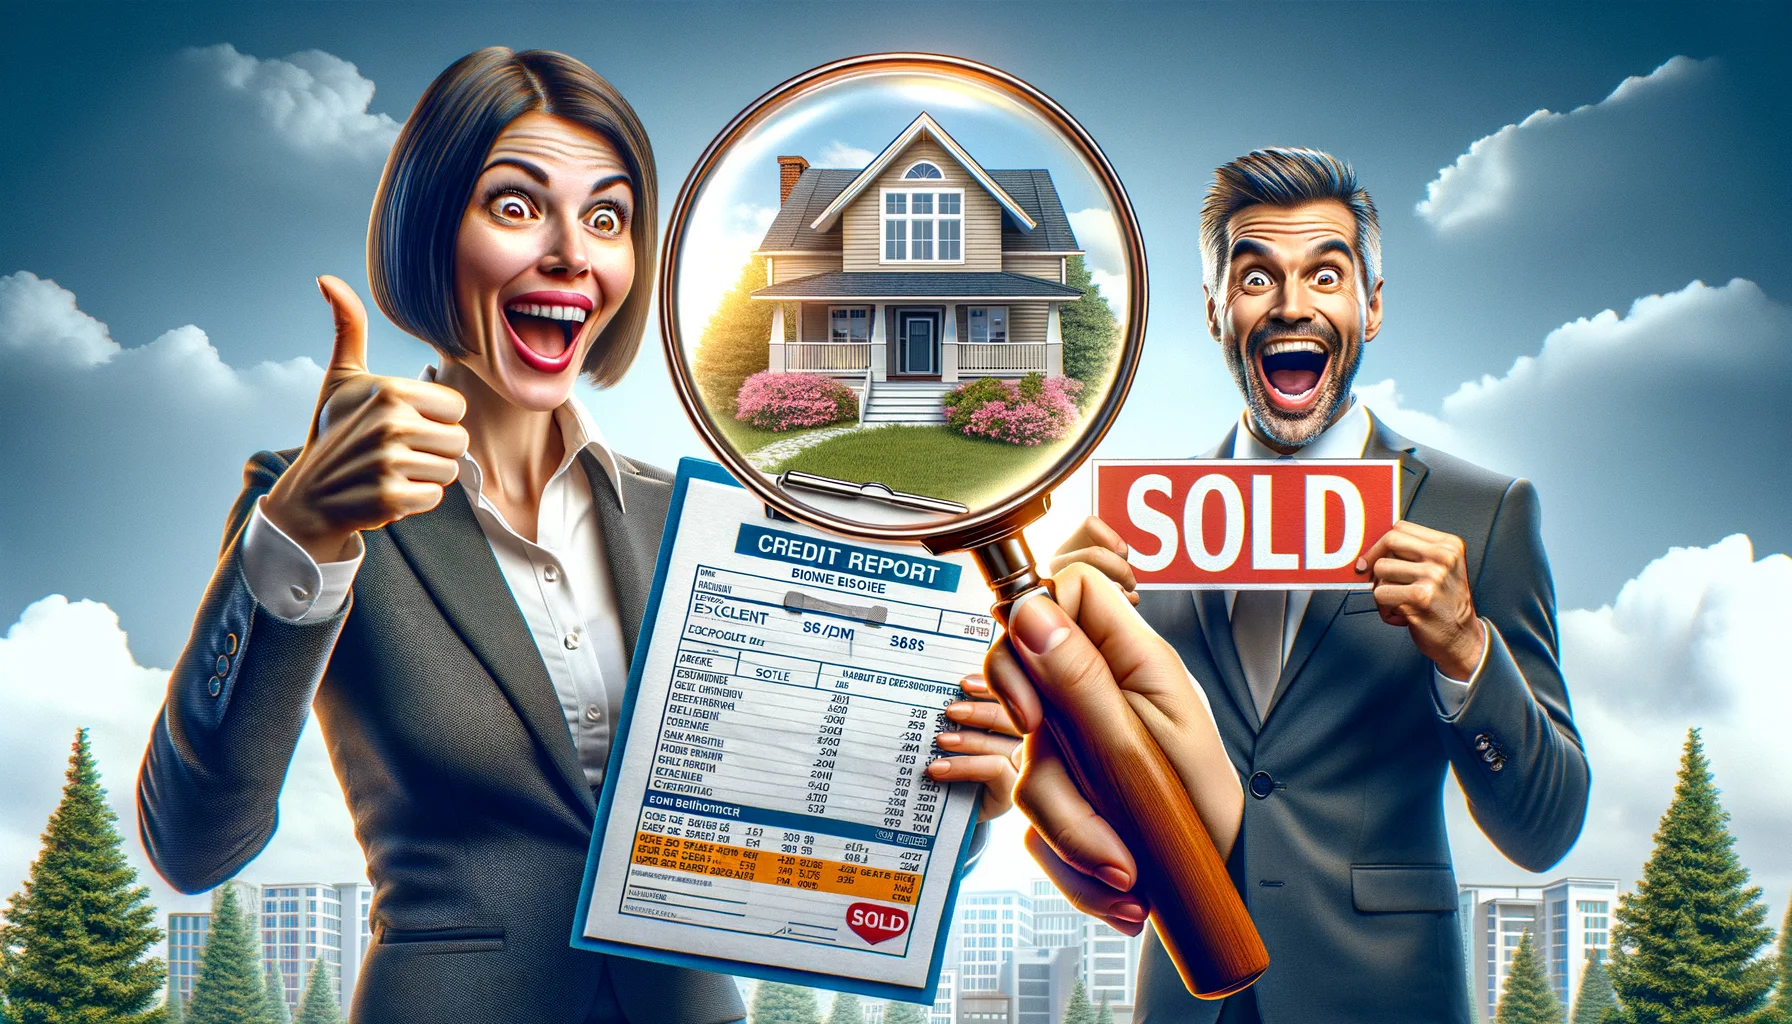 Design a humorous and hyper-realistic image that illustrates the concept of home buying with a perfect credit score. Image composition should include a magnifying glass zooming in on a pristine credit report held by a Caucasian woman in a professional outfit, showcasing an 'excellent' rating. In the background, an ecstatic Hispanic man holding a sold house placard, signifying successful home buying. Exaggerated expressions of joy, large numbers indicating high scores and the dream-like aura of a perfect residential house can add to the comedic and surreal elements of the scenario.